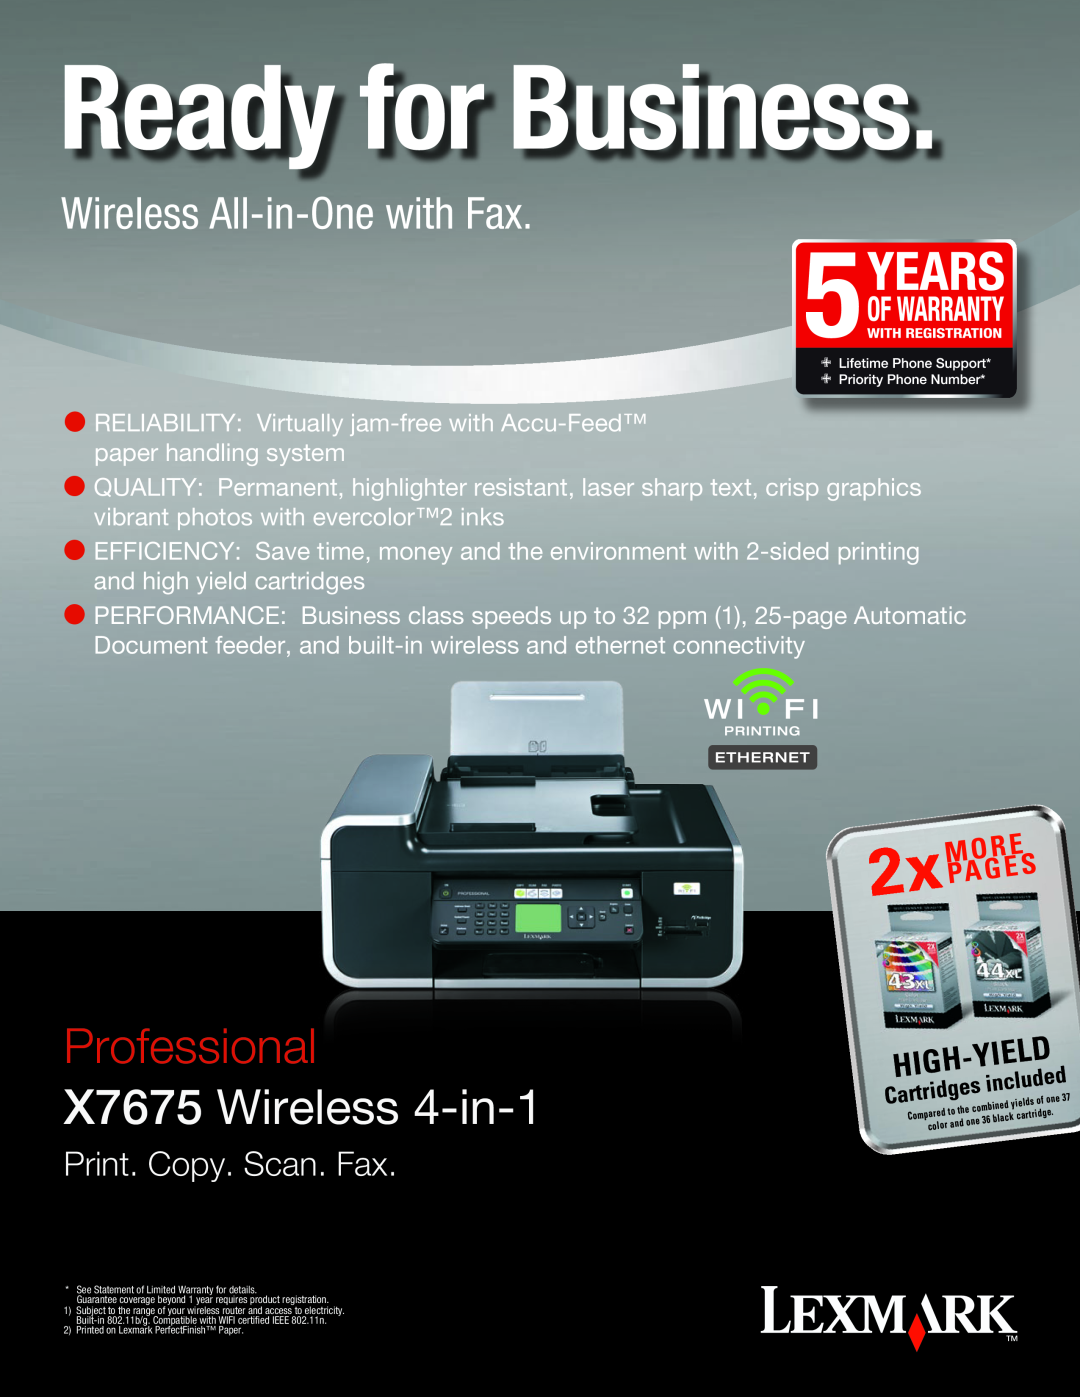 Univex warranty Ready for Business, Professional, X7675 Wireless 4-in-1, Wireless All-in-One with Fax, Yield, High 